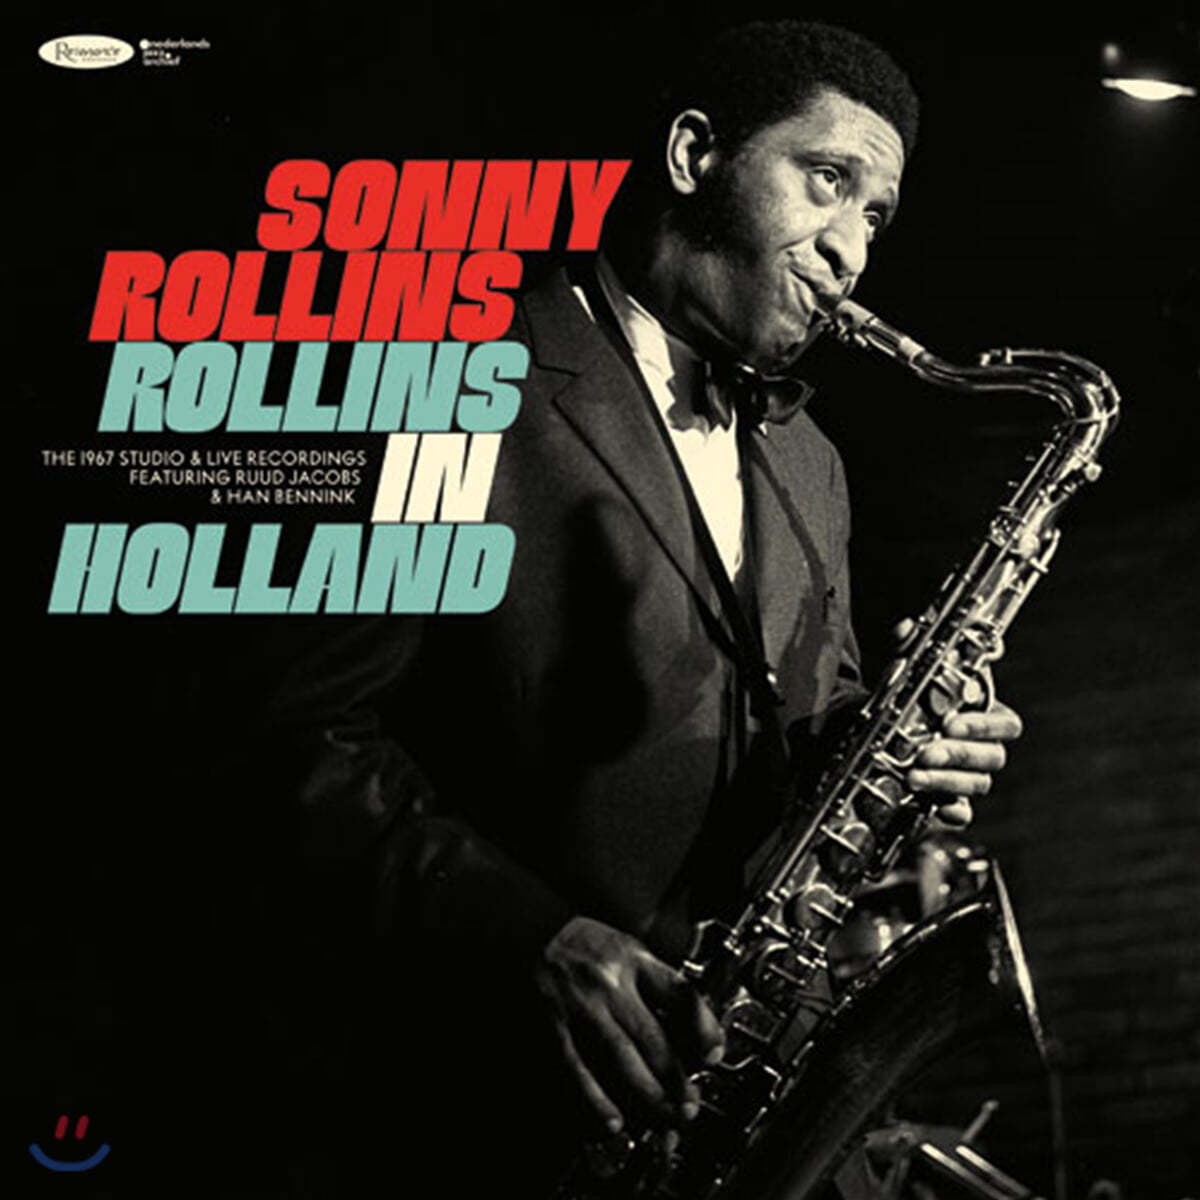 Sony Rollins (소니 롤린스) - Rollins in Holland: THE 1967 Studio & Live Recordings [3LP] 